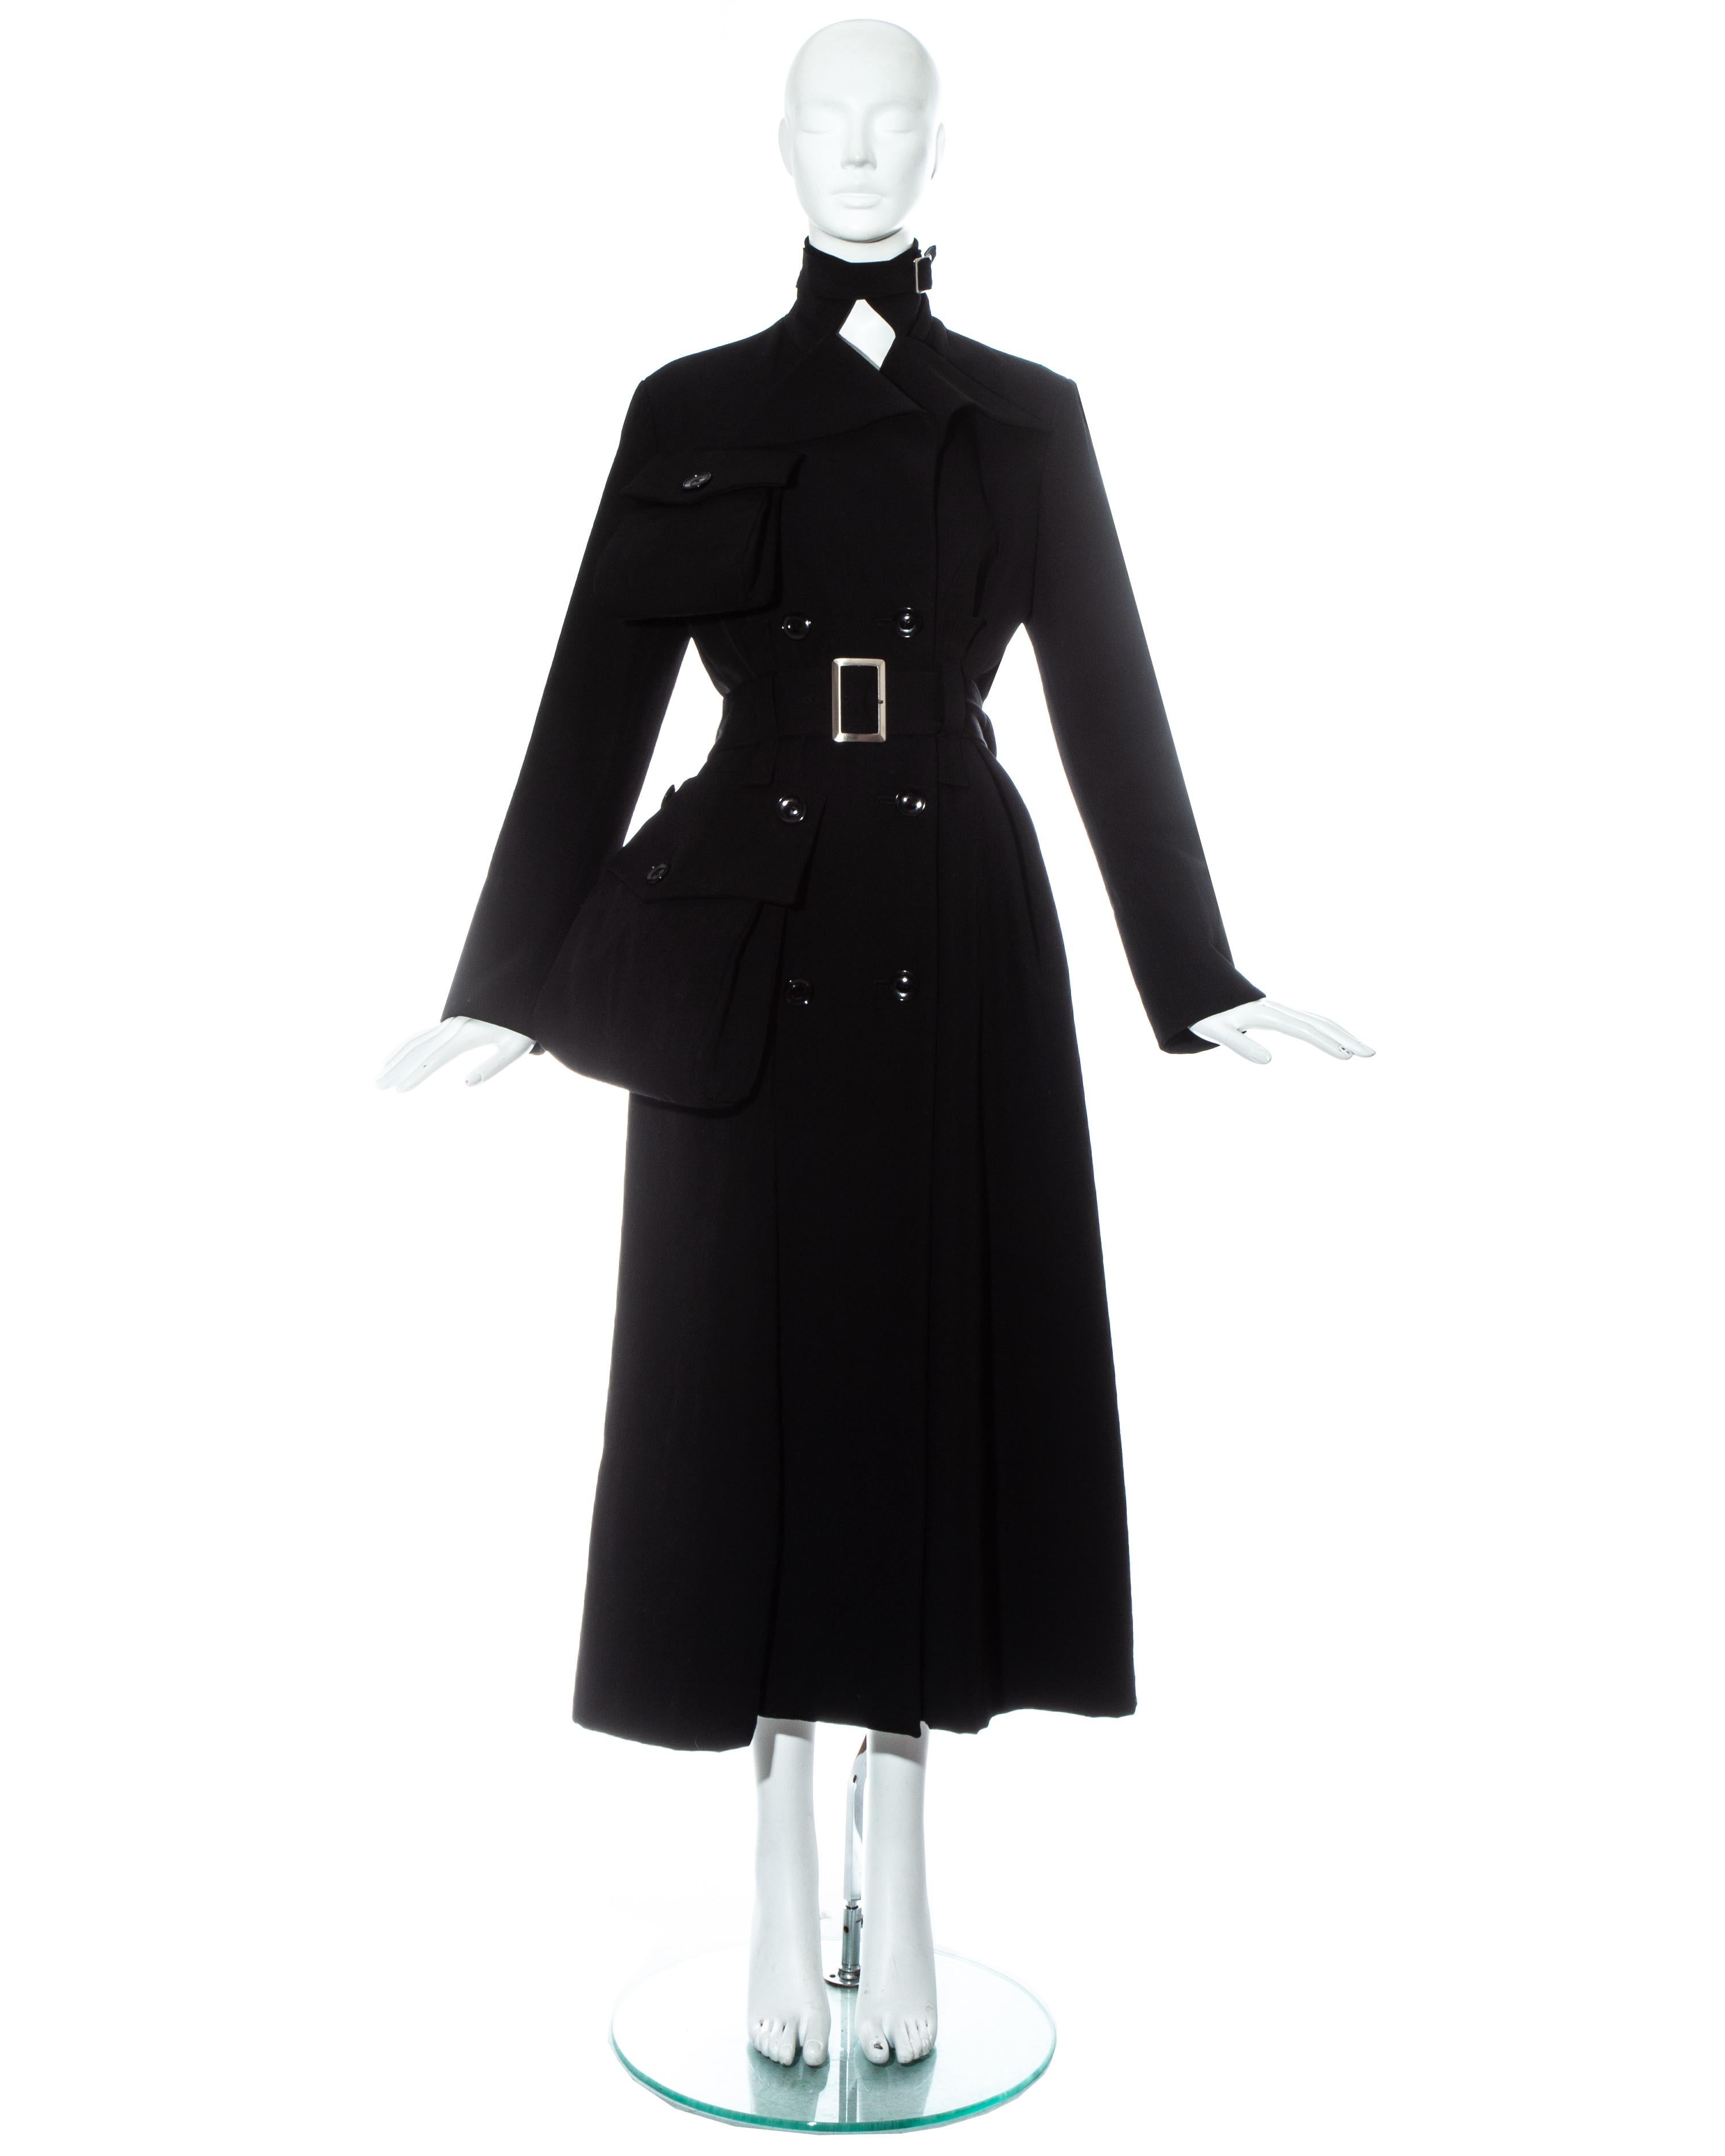 Yohji Yamamoto; black wool gabardine maxi coat with exaggerated external flap pockets and belt buckle fastenings on waist and neck.  

 Fall-Winter 2004   

- The same coat is in the permanent collection of the Victoria & Albert museum archives.